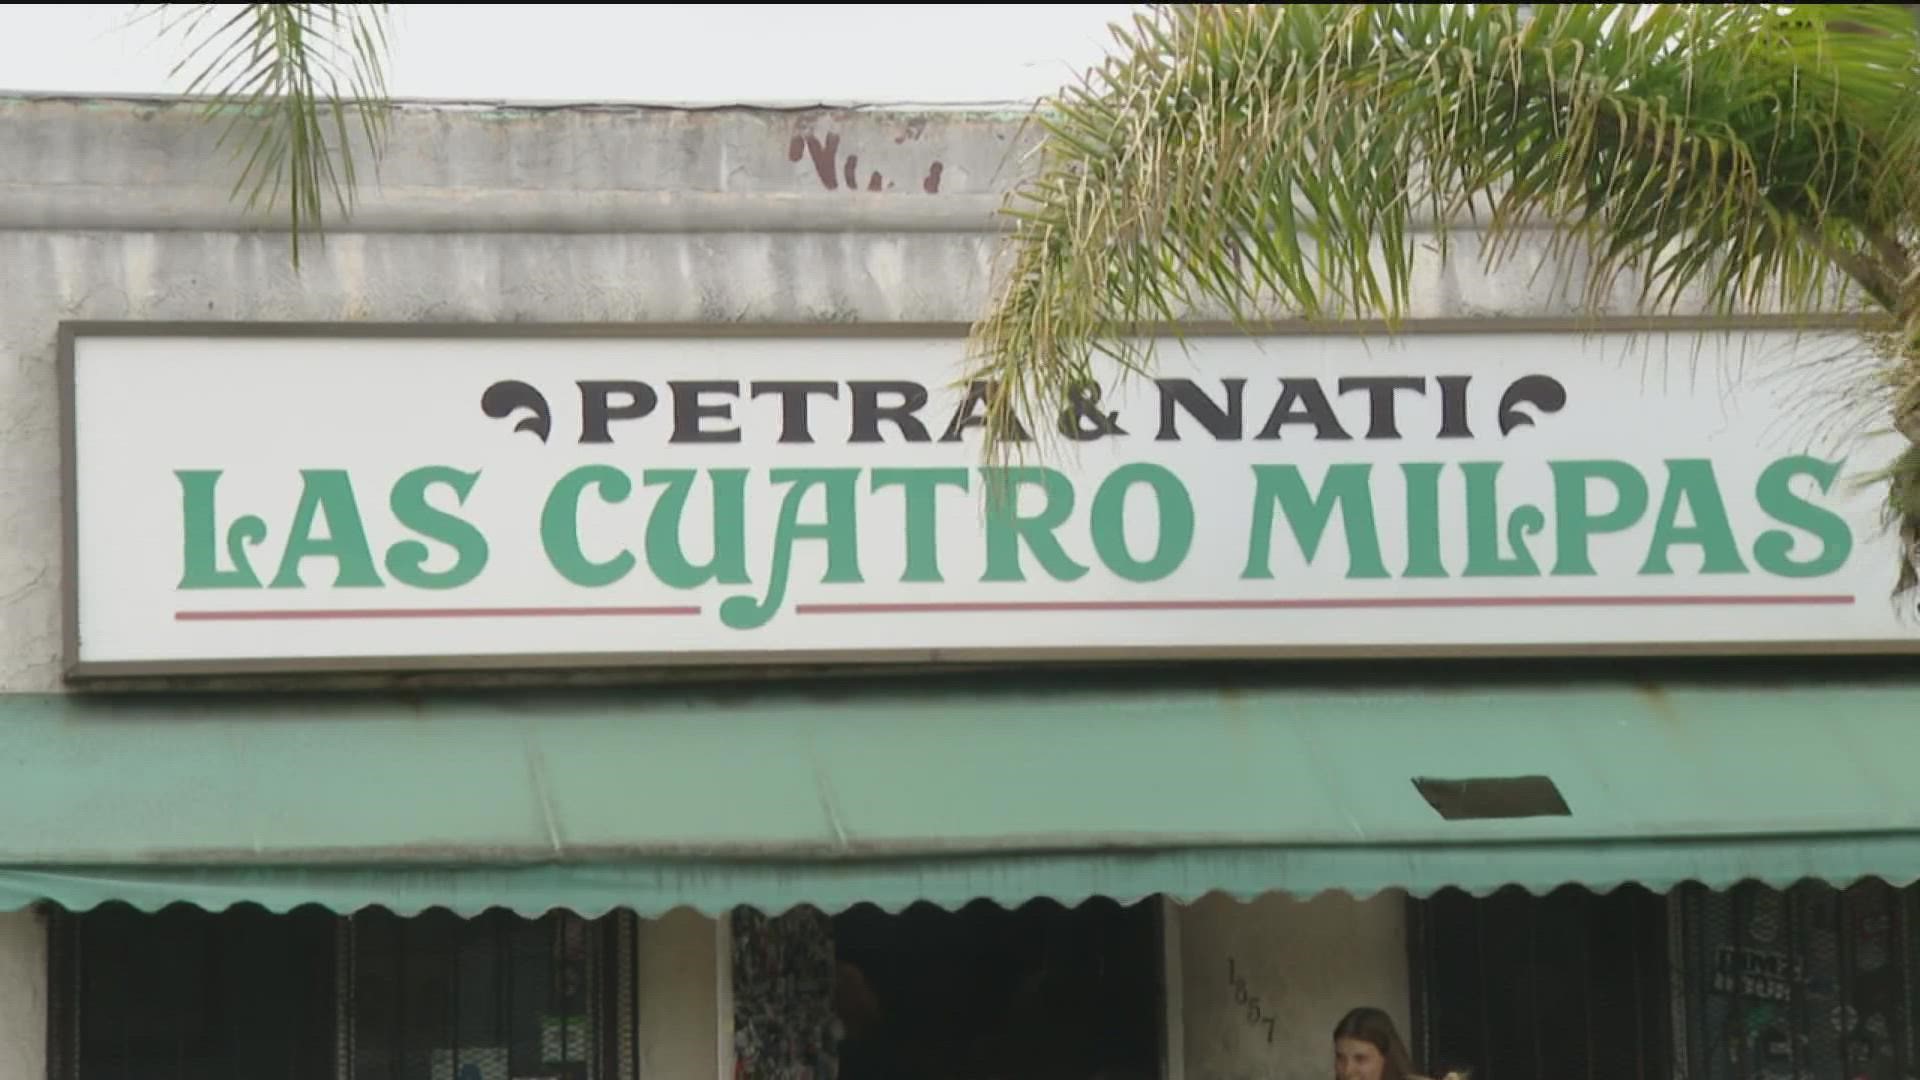 Las Cuatro Milpas in Barrio Logan opened in 1933. You can usually find a long line out the door at this popular spot!